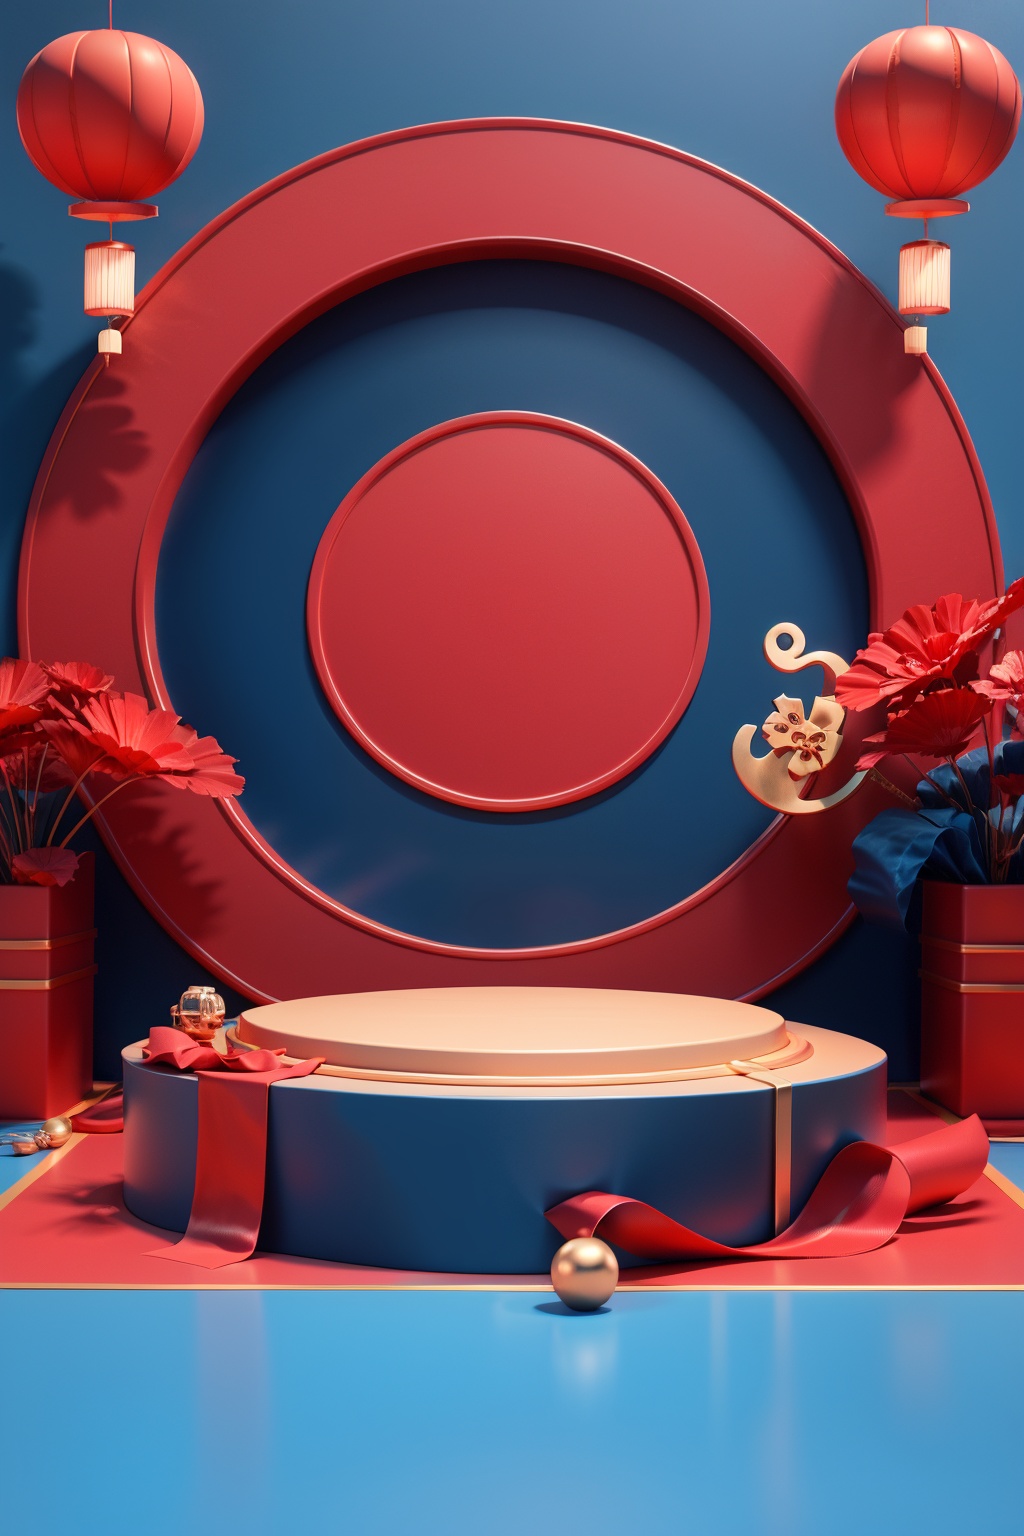 masterpiece,best quality,CNY_stage,no humans,ribbon,shadow,